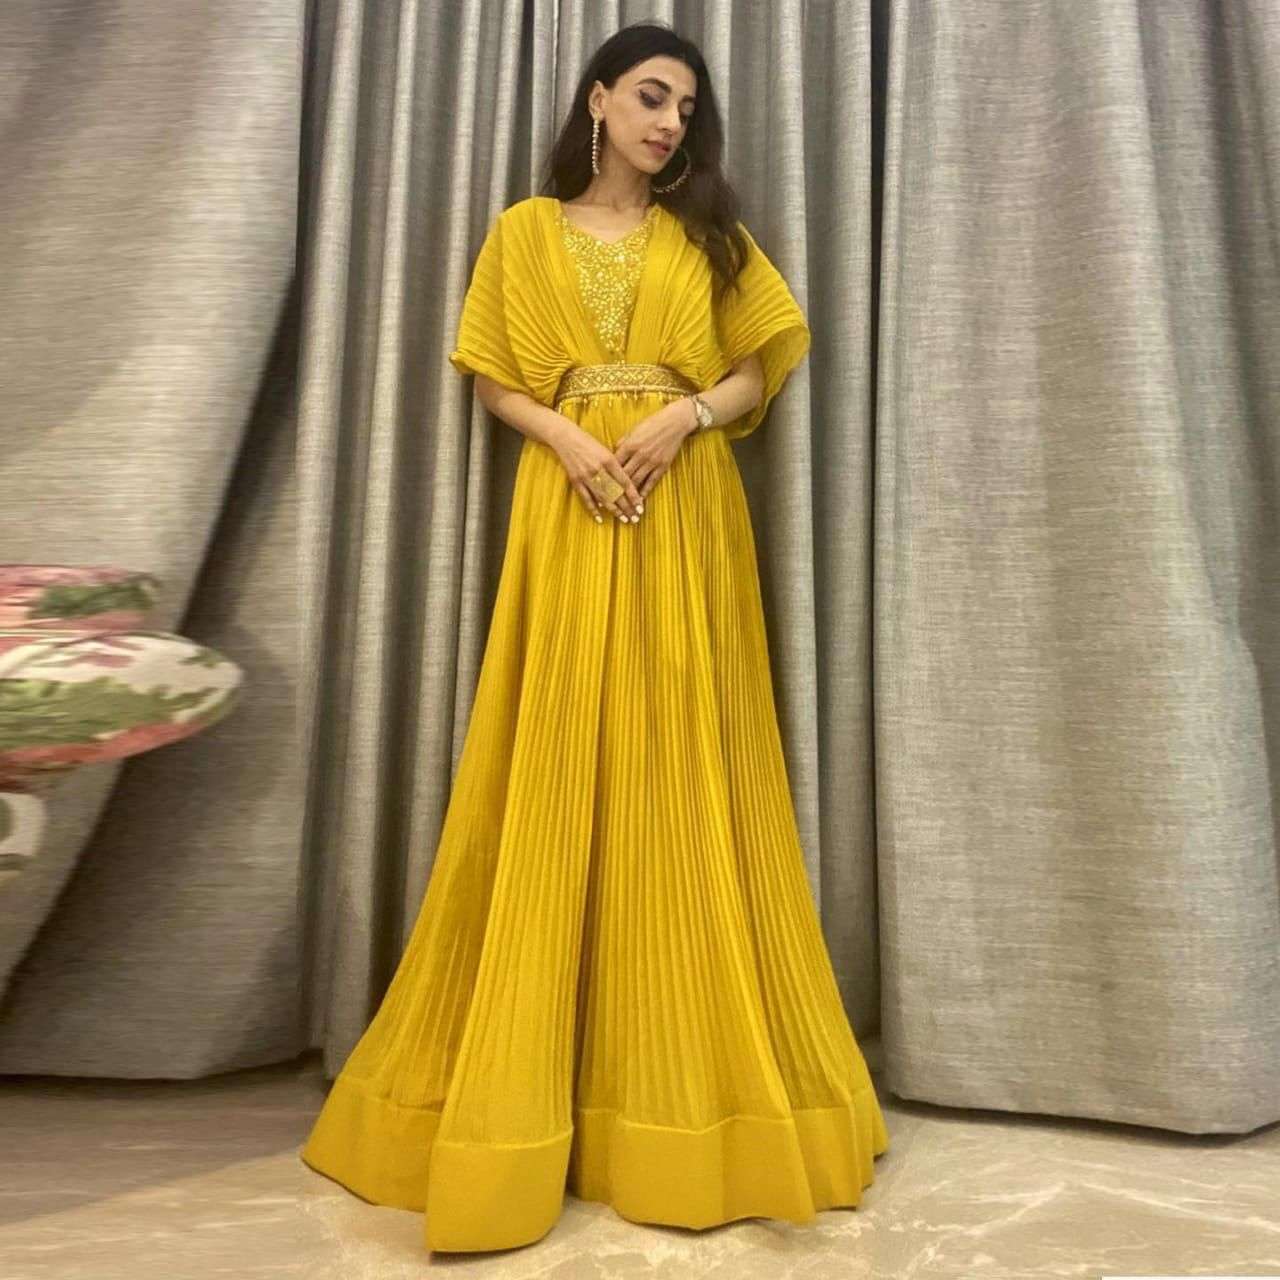 haldi special perfect evening date or party outfit the wedding season for haldi function designer handwork gown in affordable price 